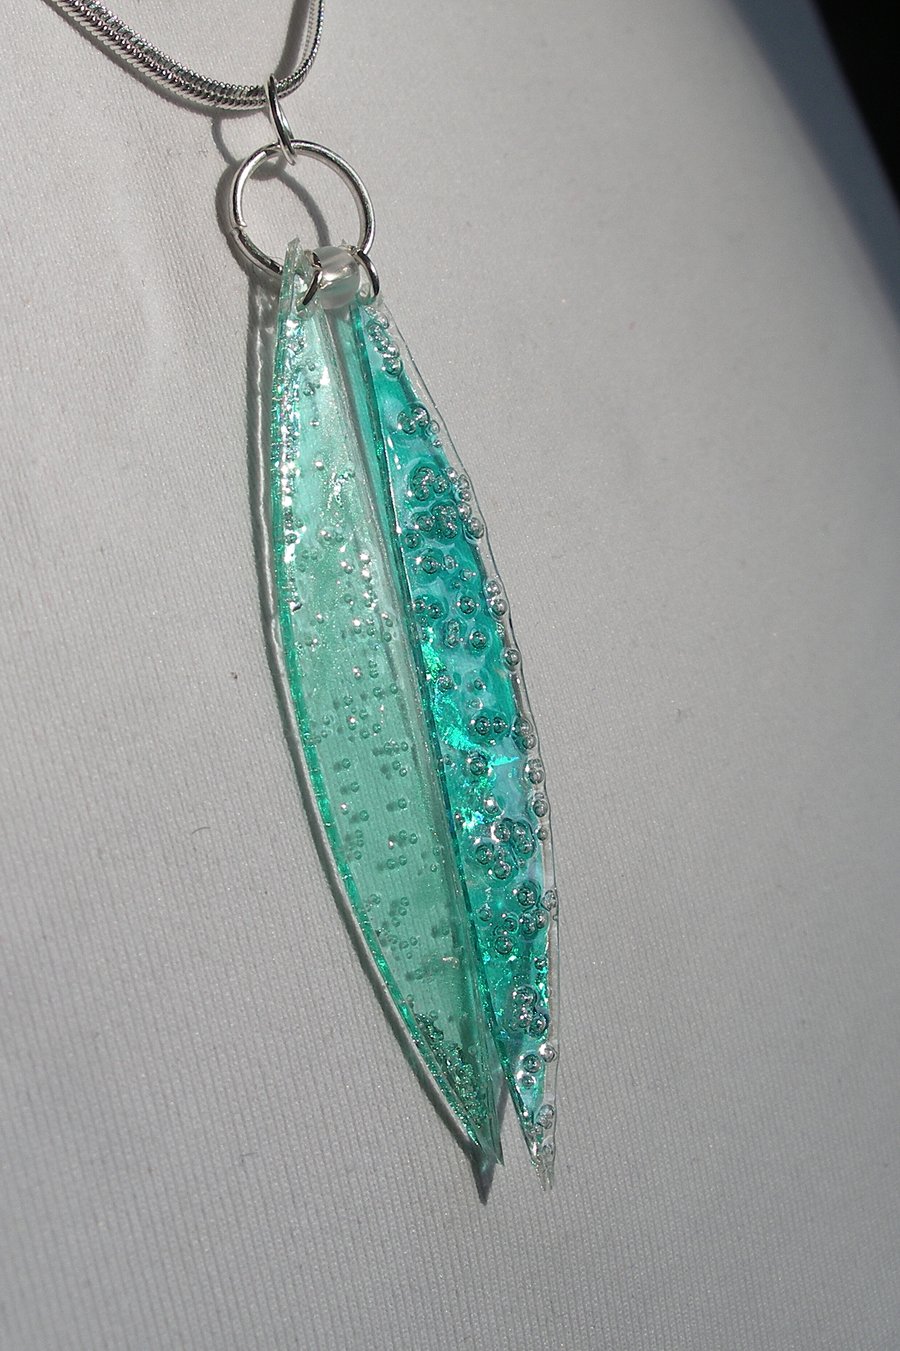 Two piece turquoise pendant.